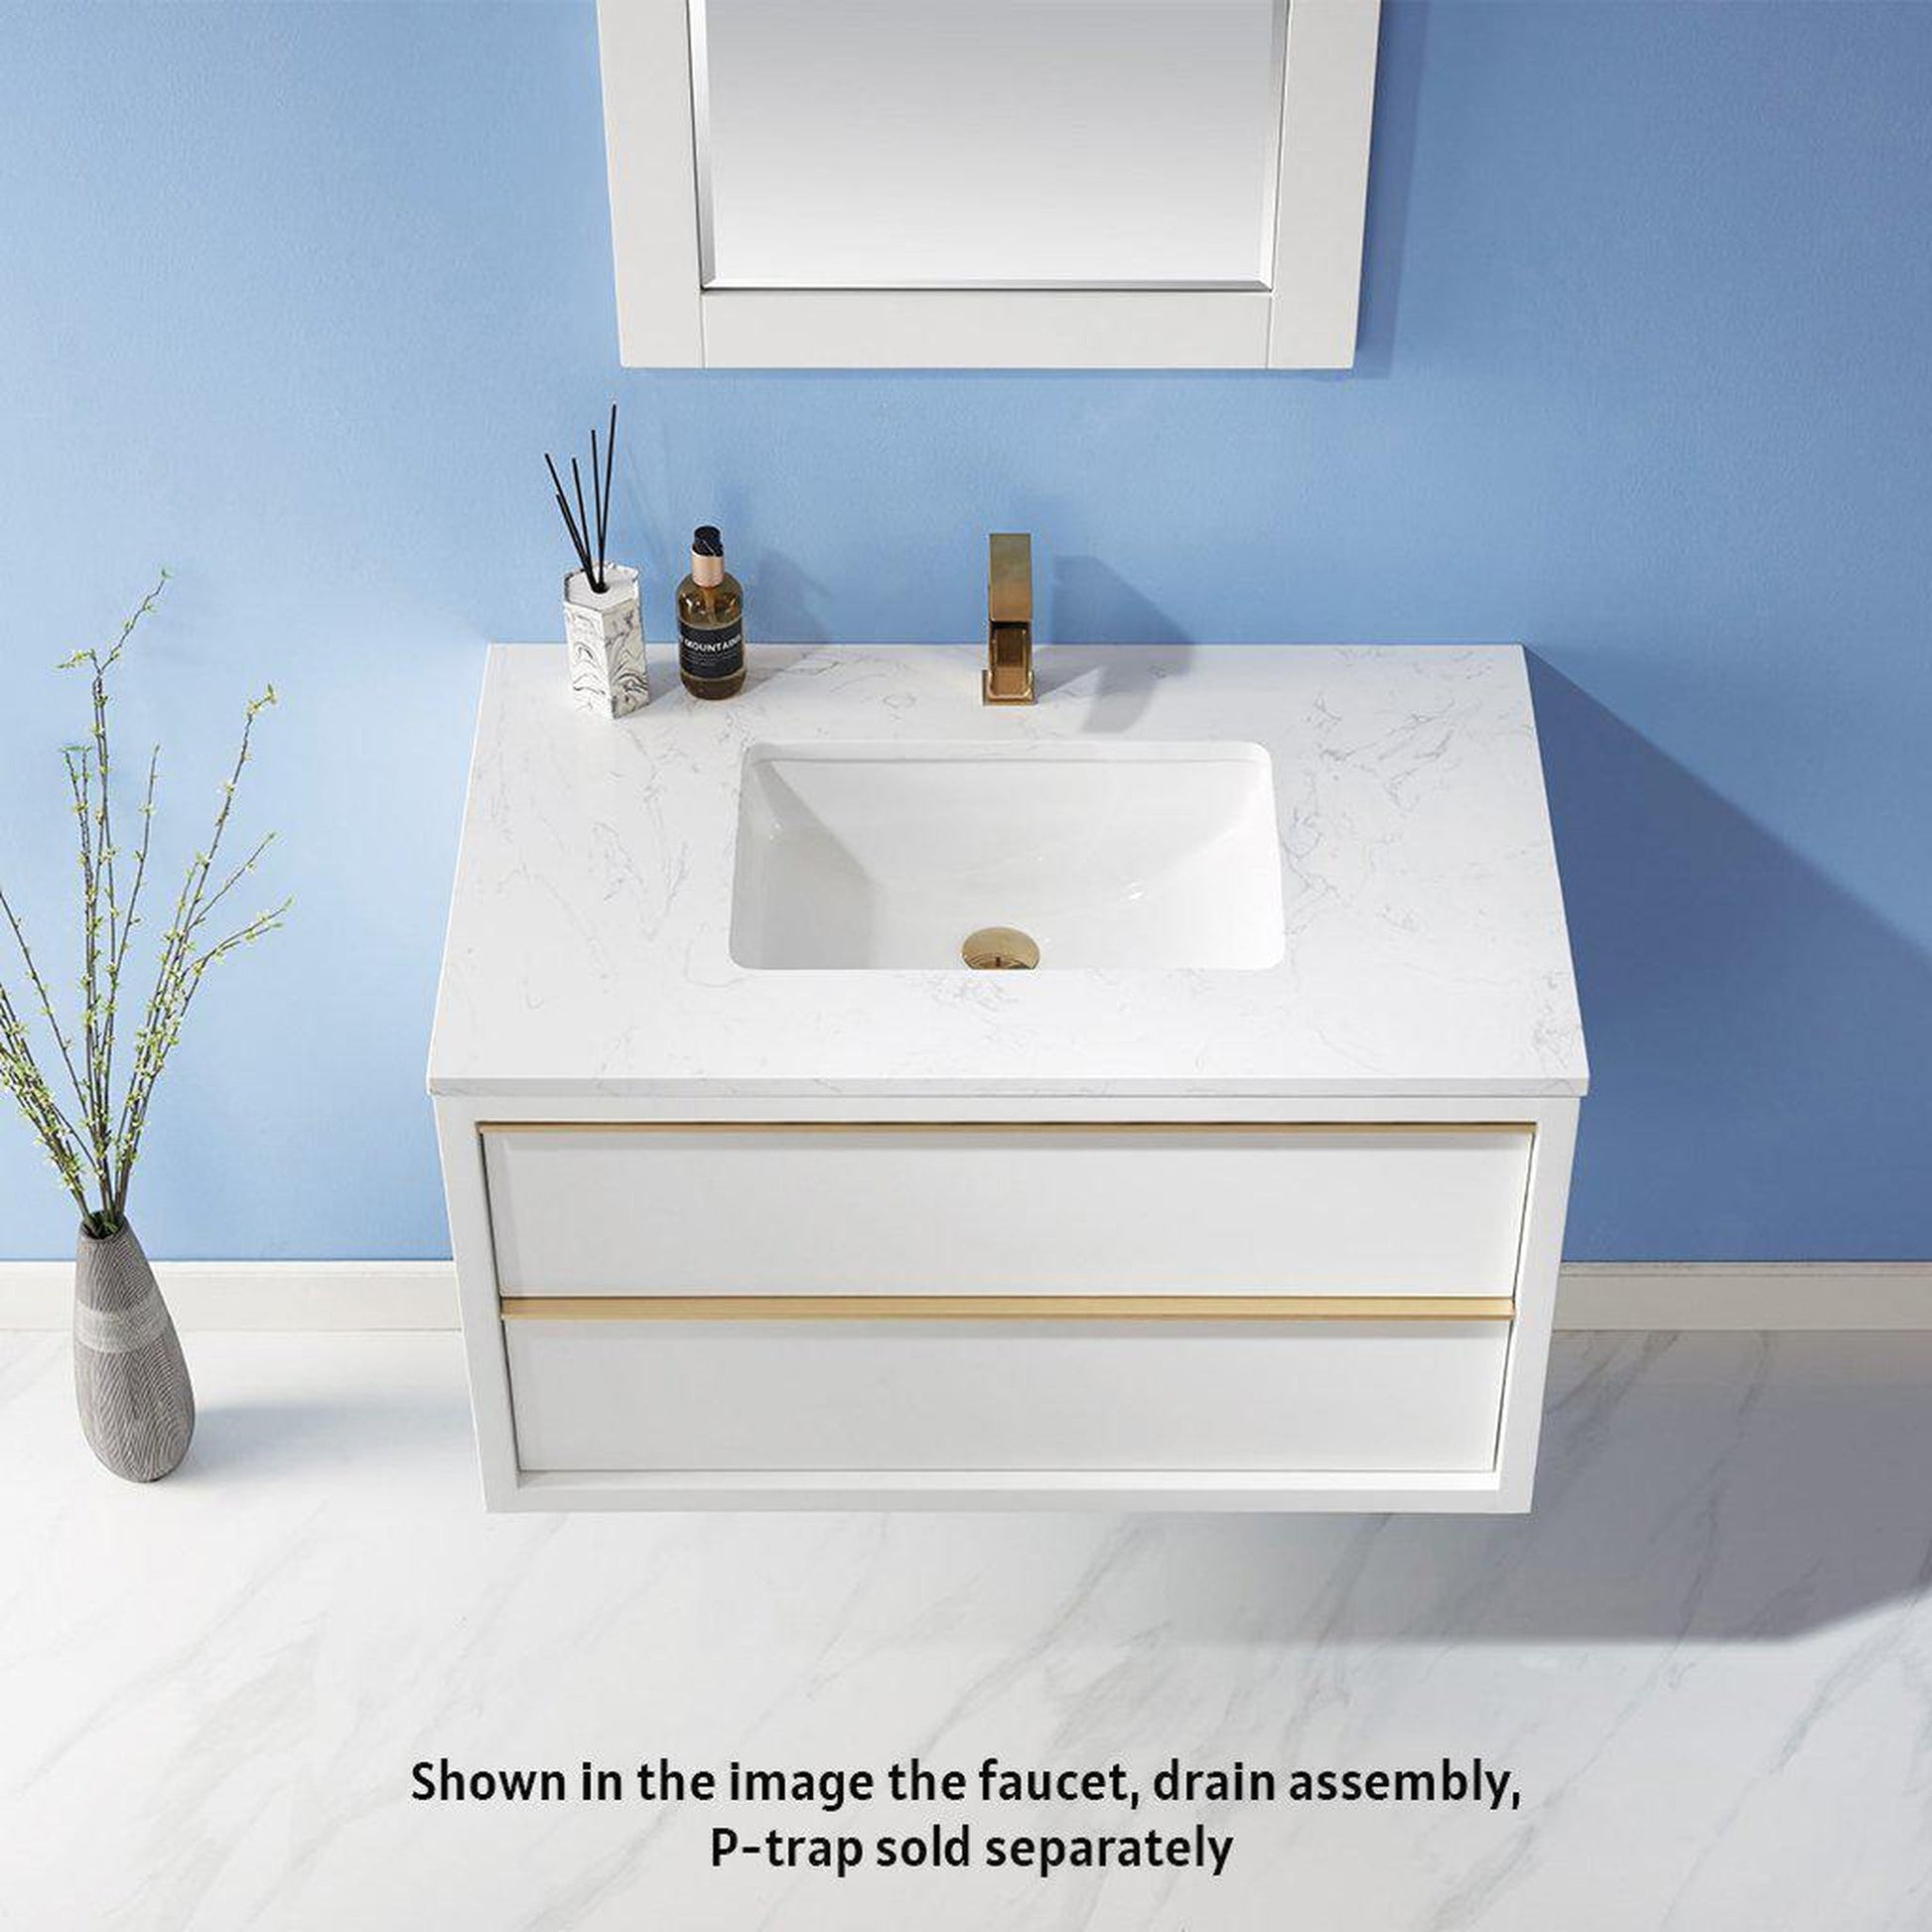 Altair Morgan 36" Single White Wall-Mounted Bathroom Vanity Set With Mirror, Aosta White Composite Stone Top, Rectangular Undermount Ceramic Sink, and Overflow